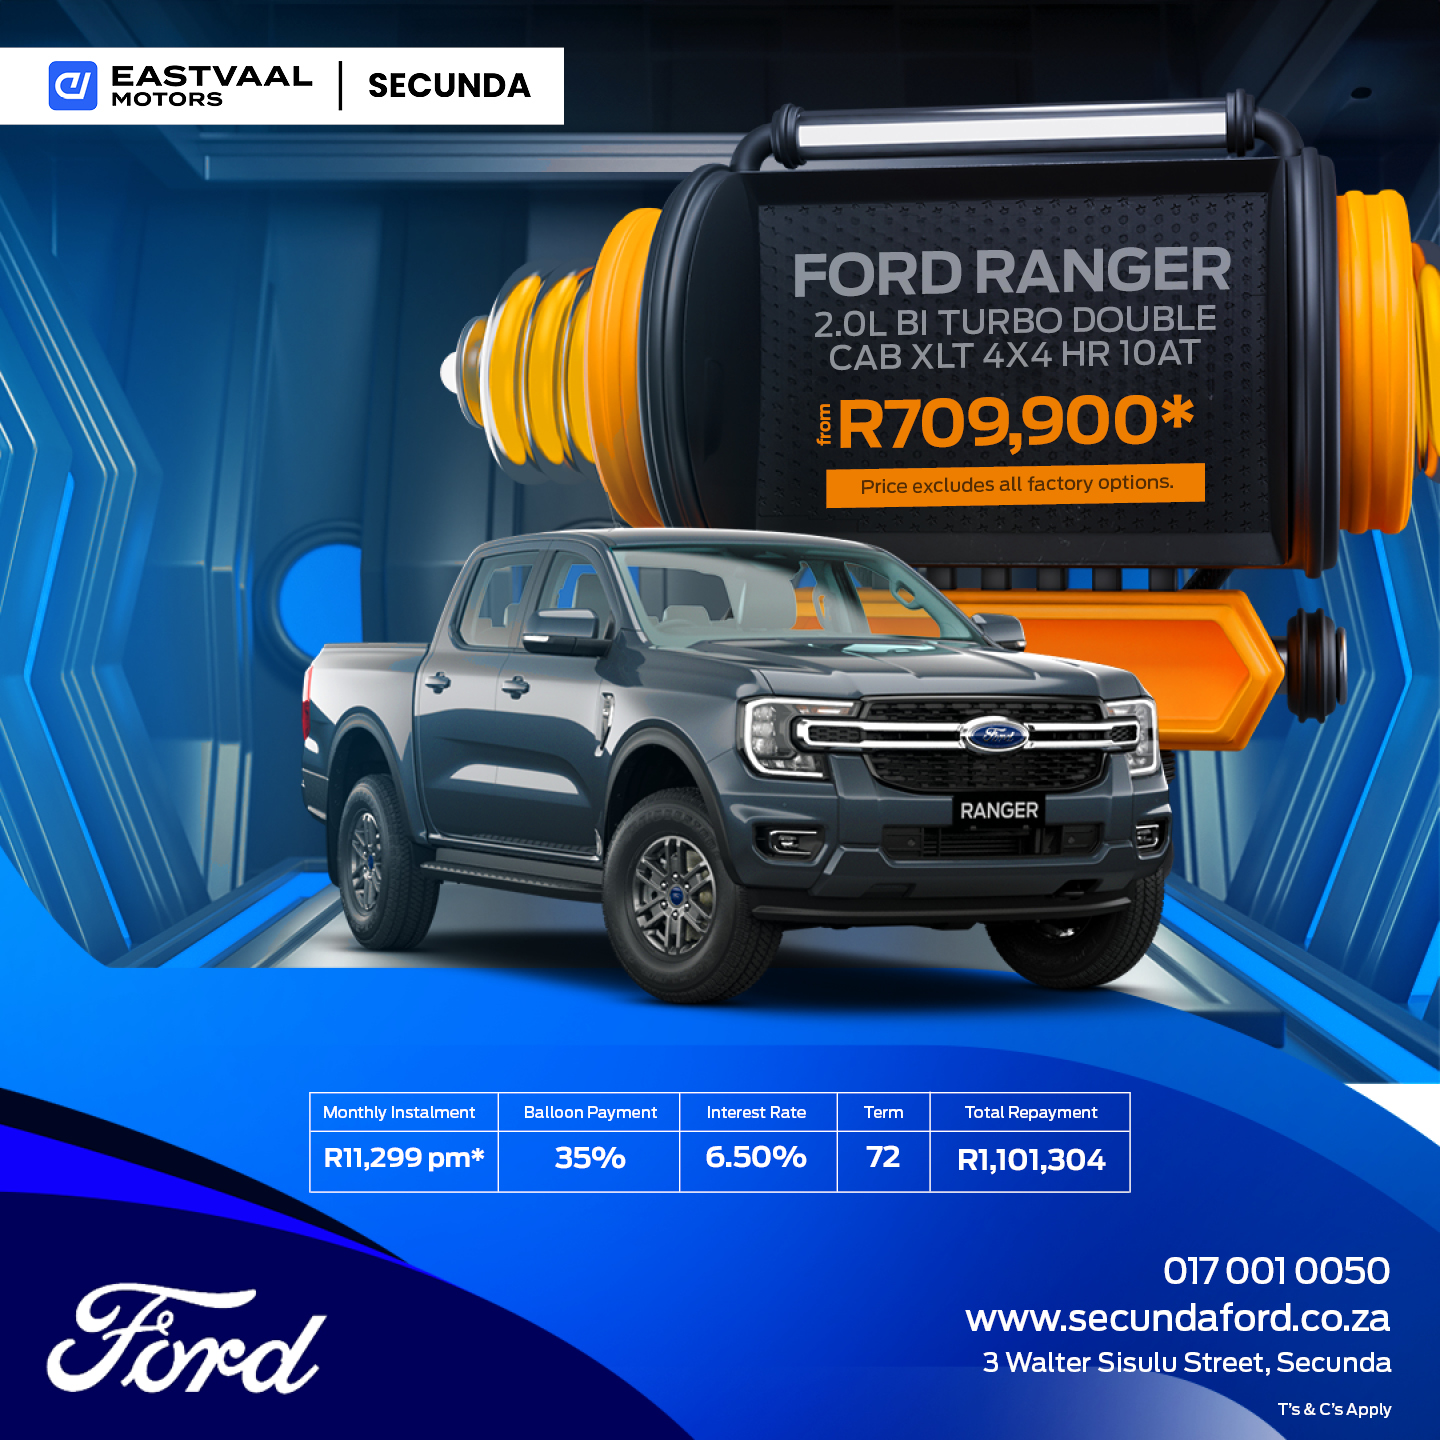 Ford Ranger 2.0L Bi Turbo Double Cab XLT 4×4 HR 10AT image from 